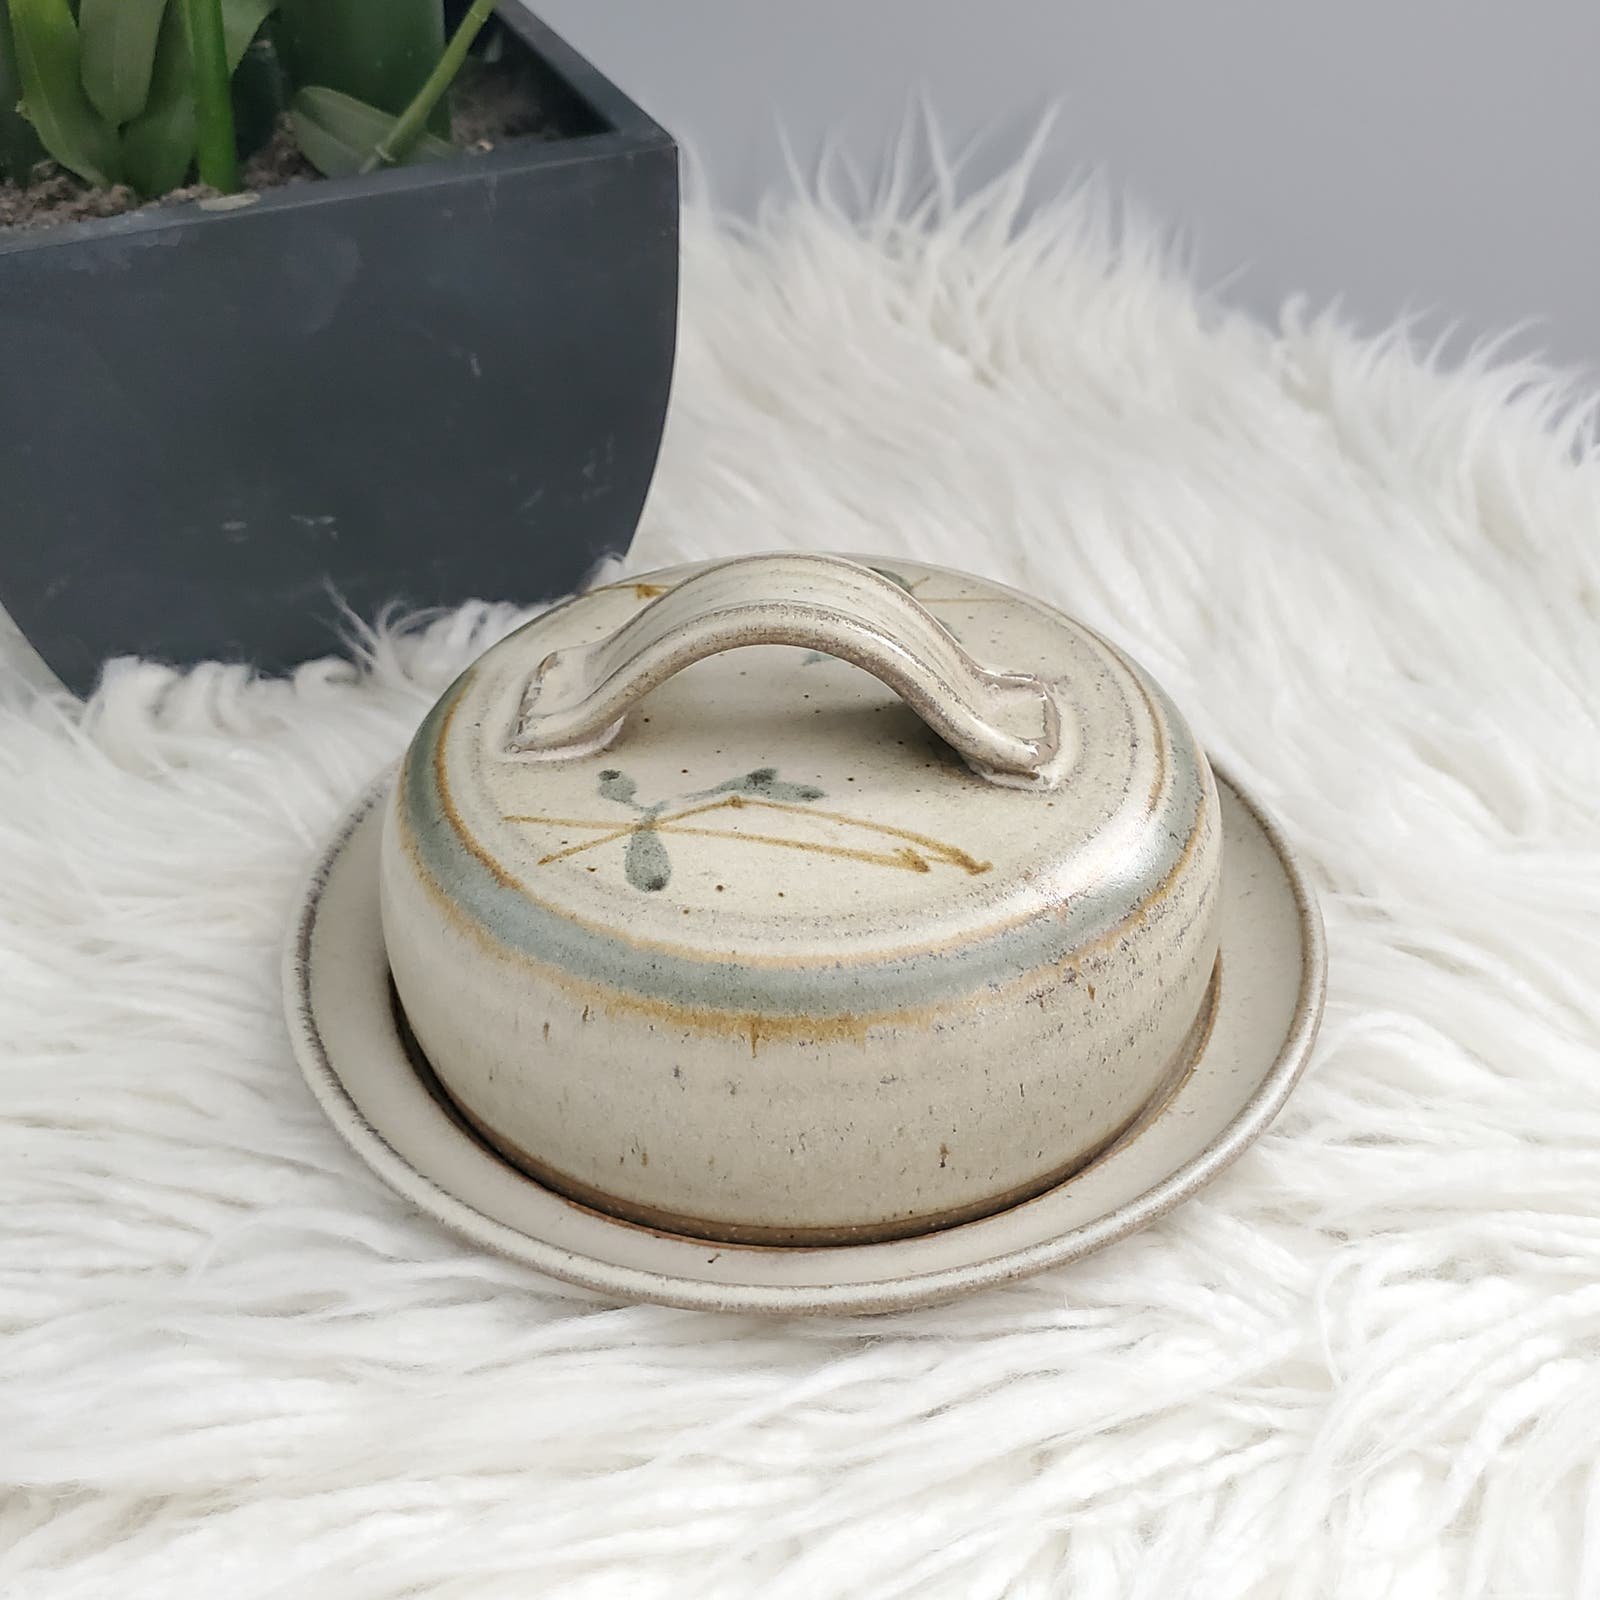 Vintage Ceramic Stoneware Butter Dish With Lid Signed g8Yc1joql